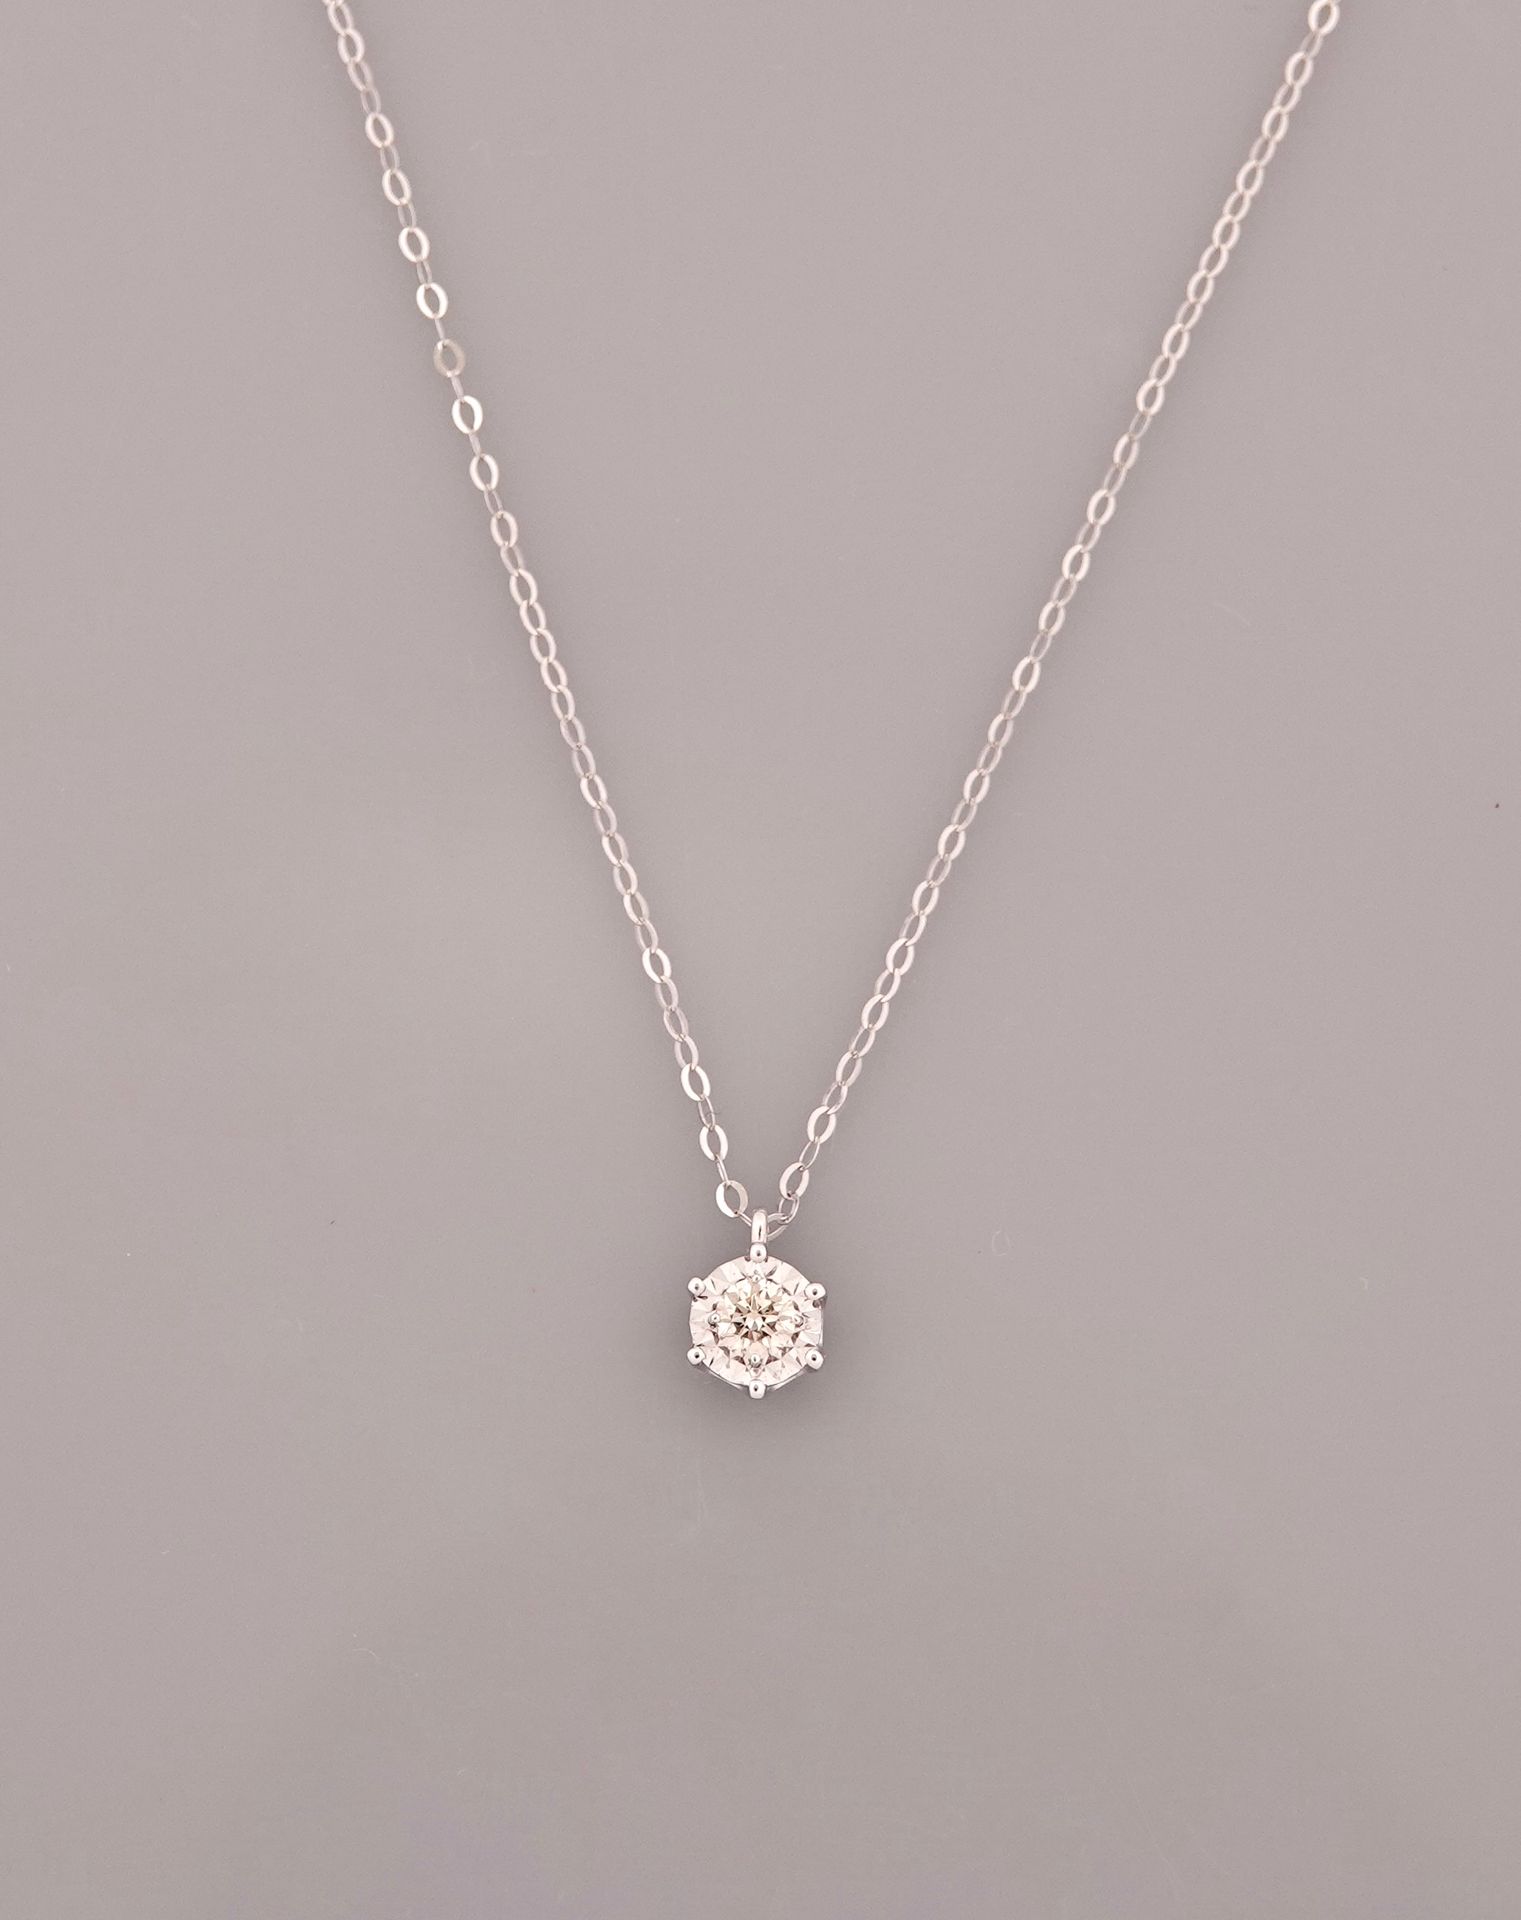 Null Necklace in white gold, 750 MM, centered with a diamond weighing 0.10 carat&hellip;